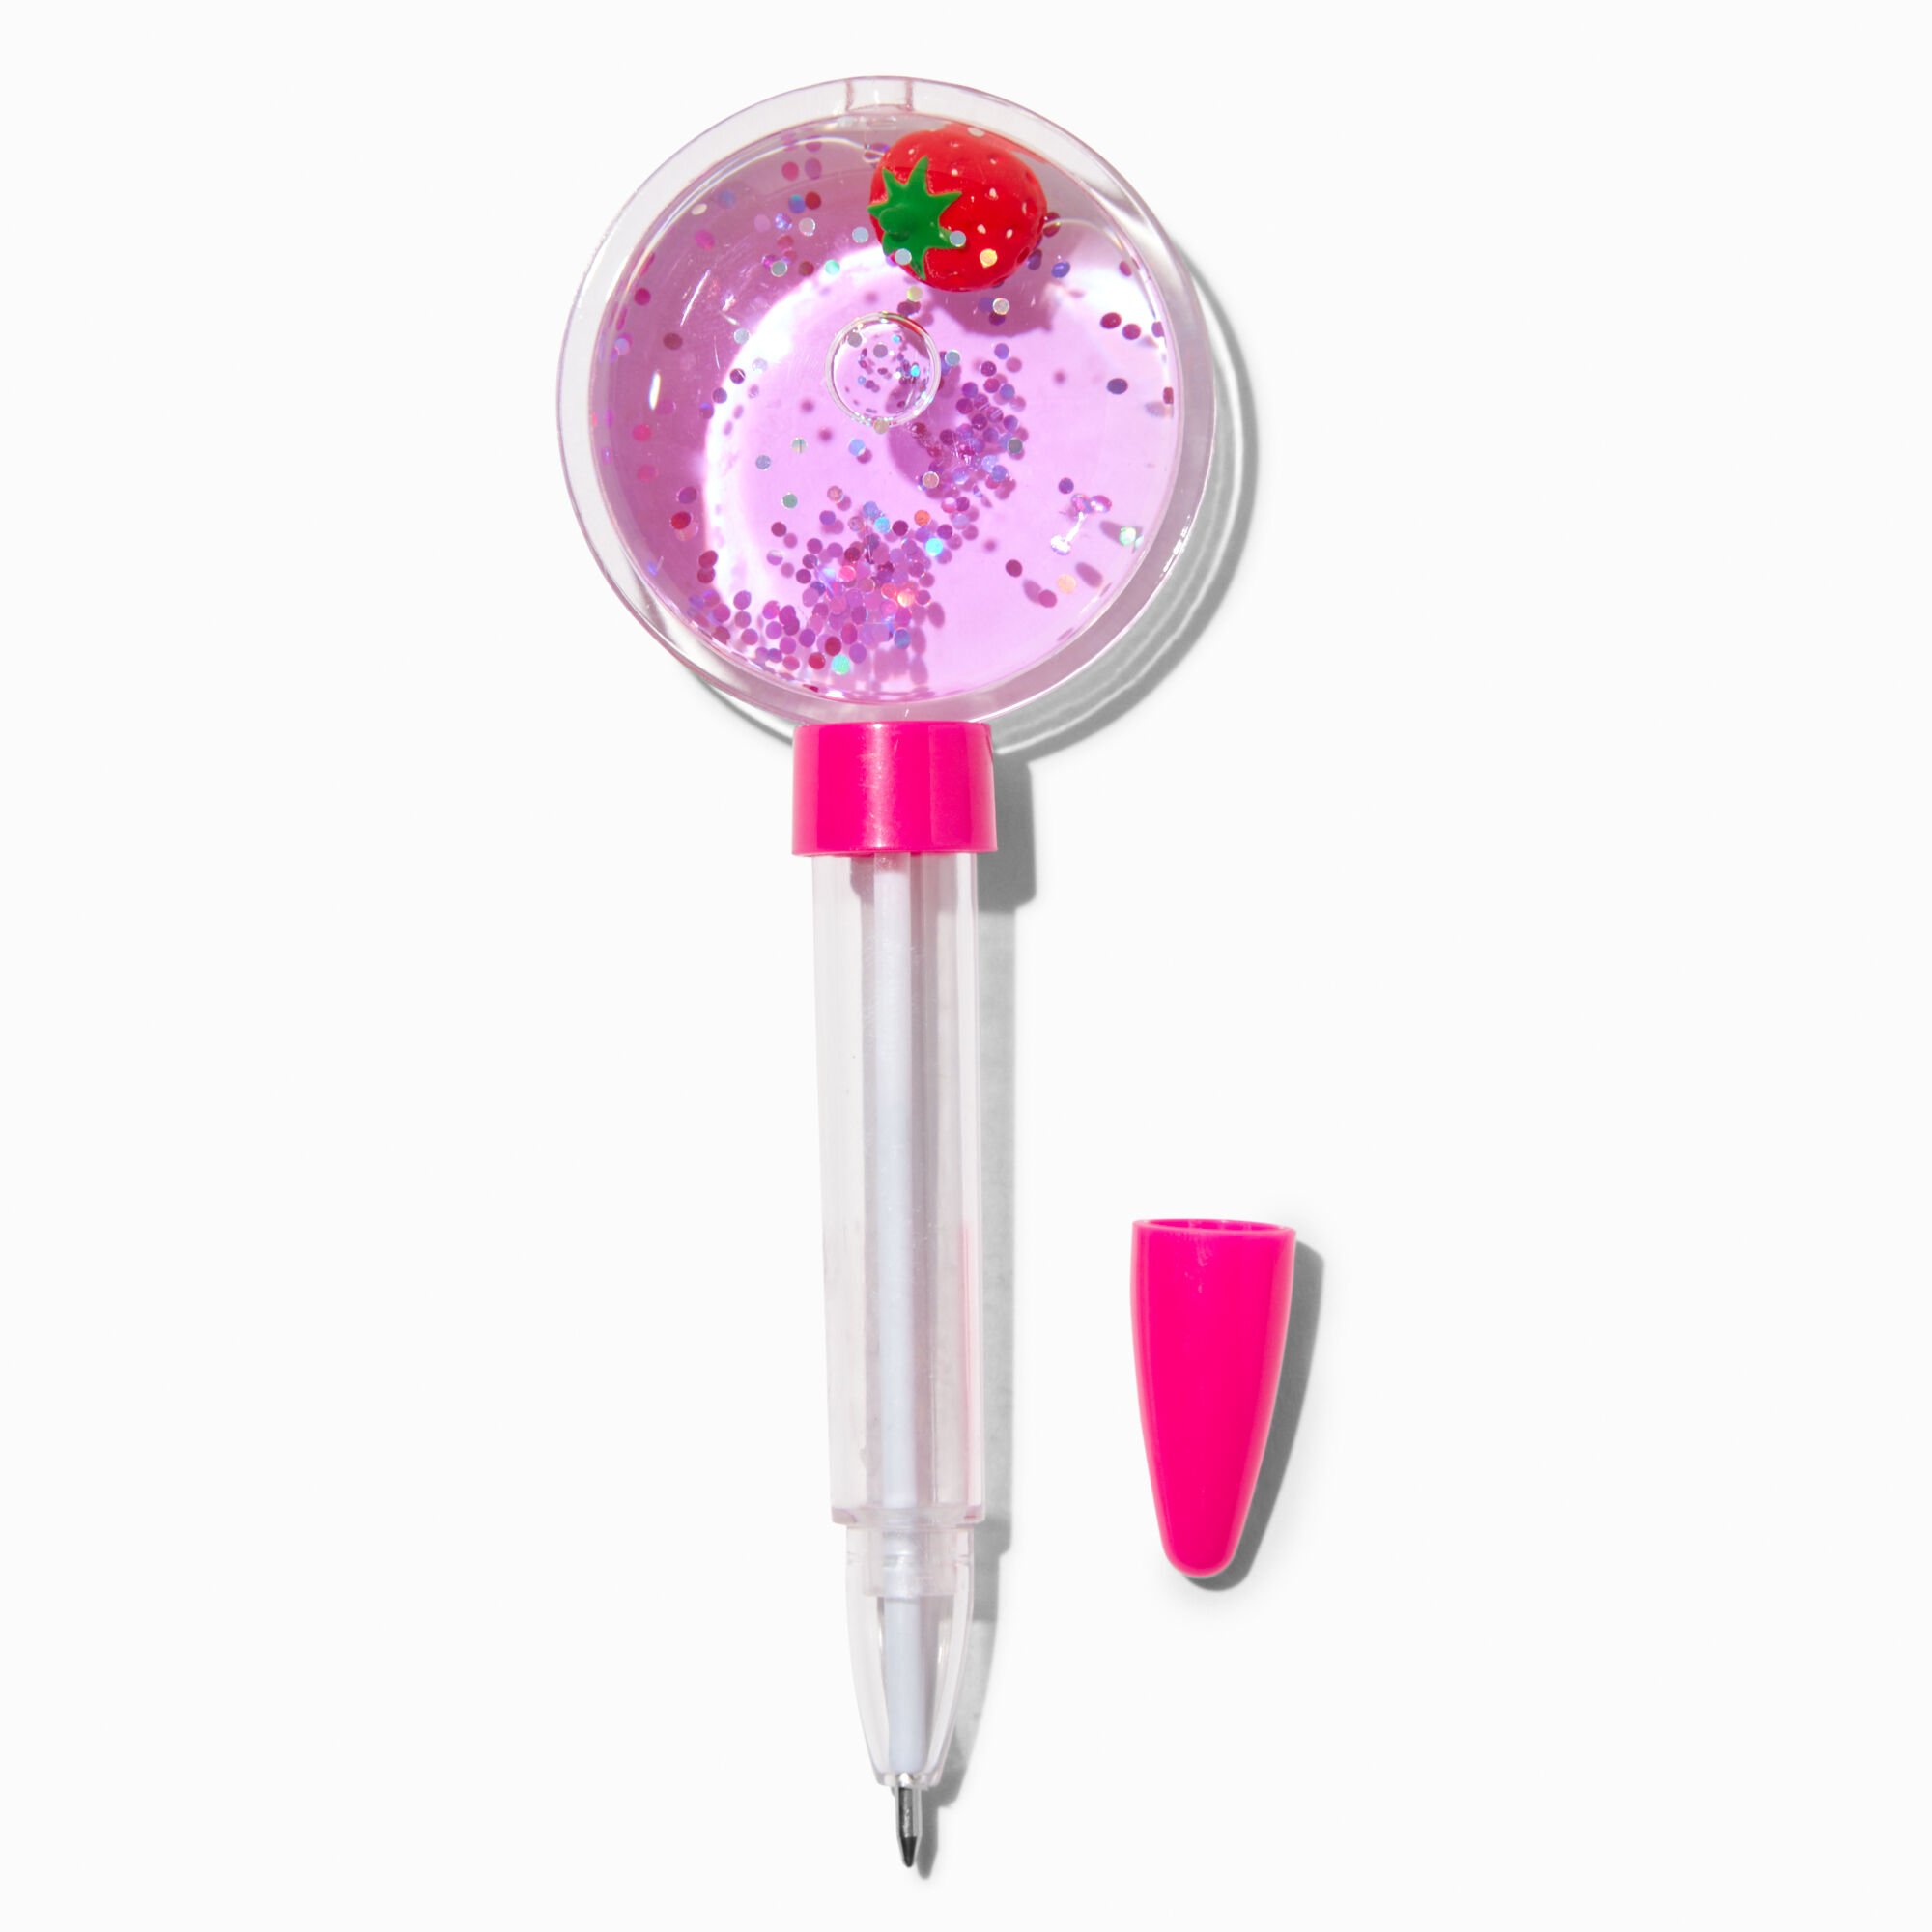 View Claires Strawberry WaterFilled Glitter Globe Pen information